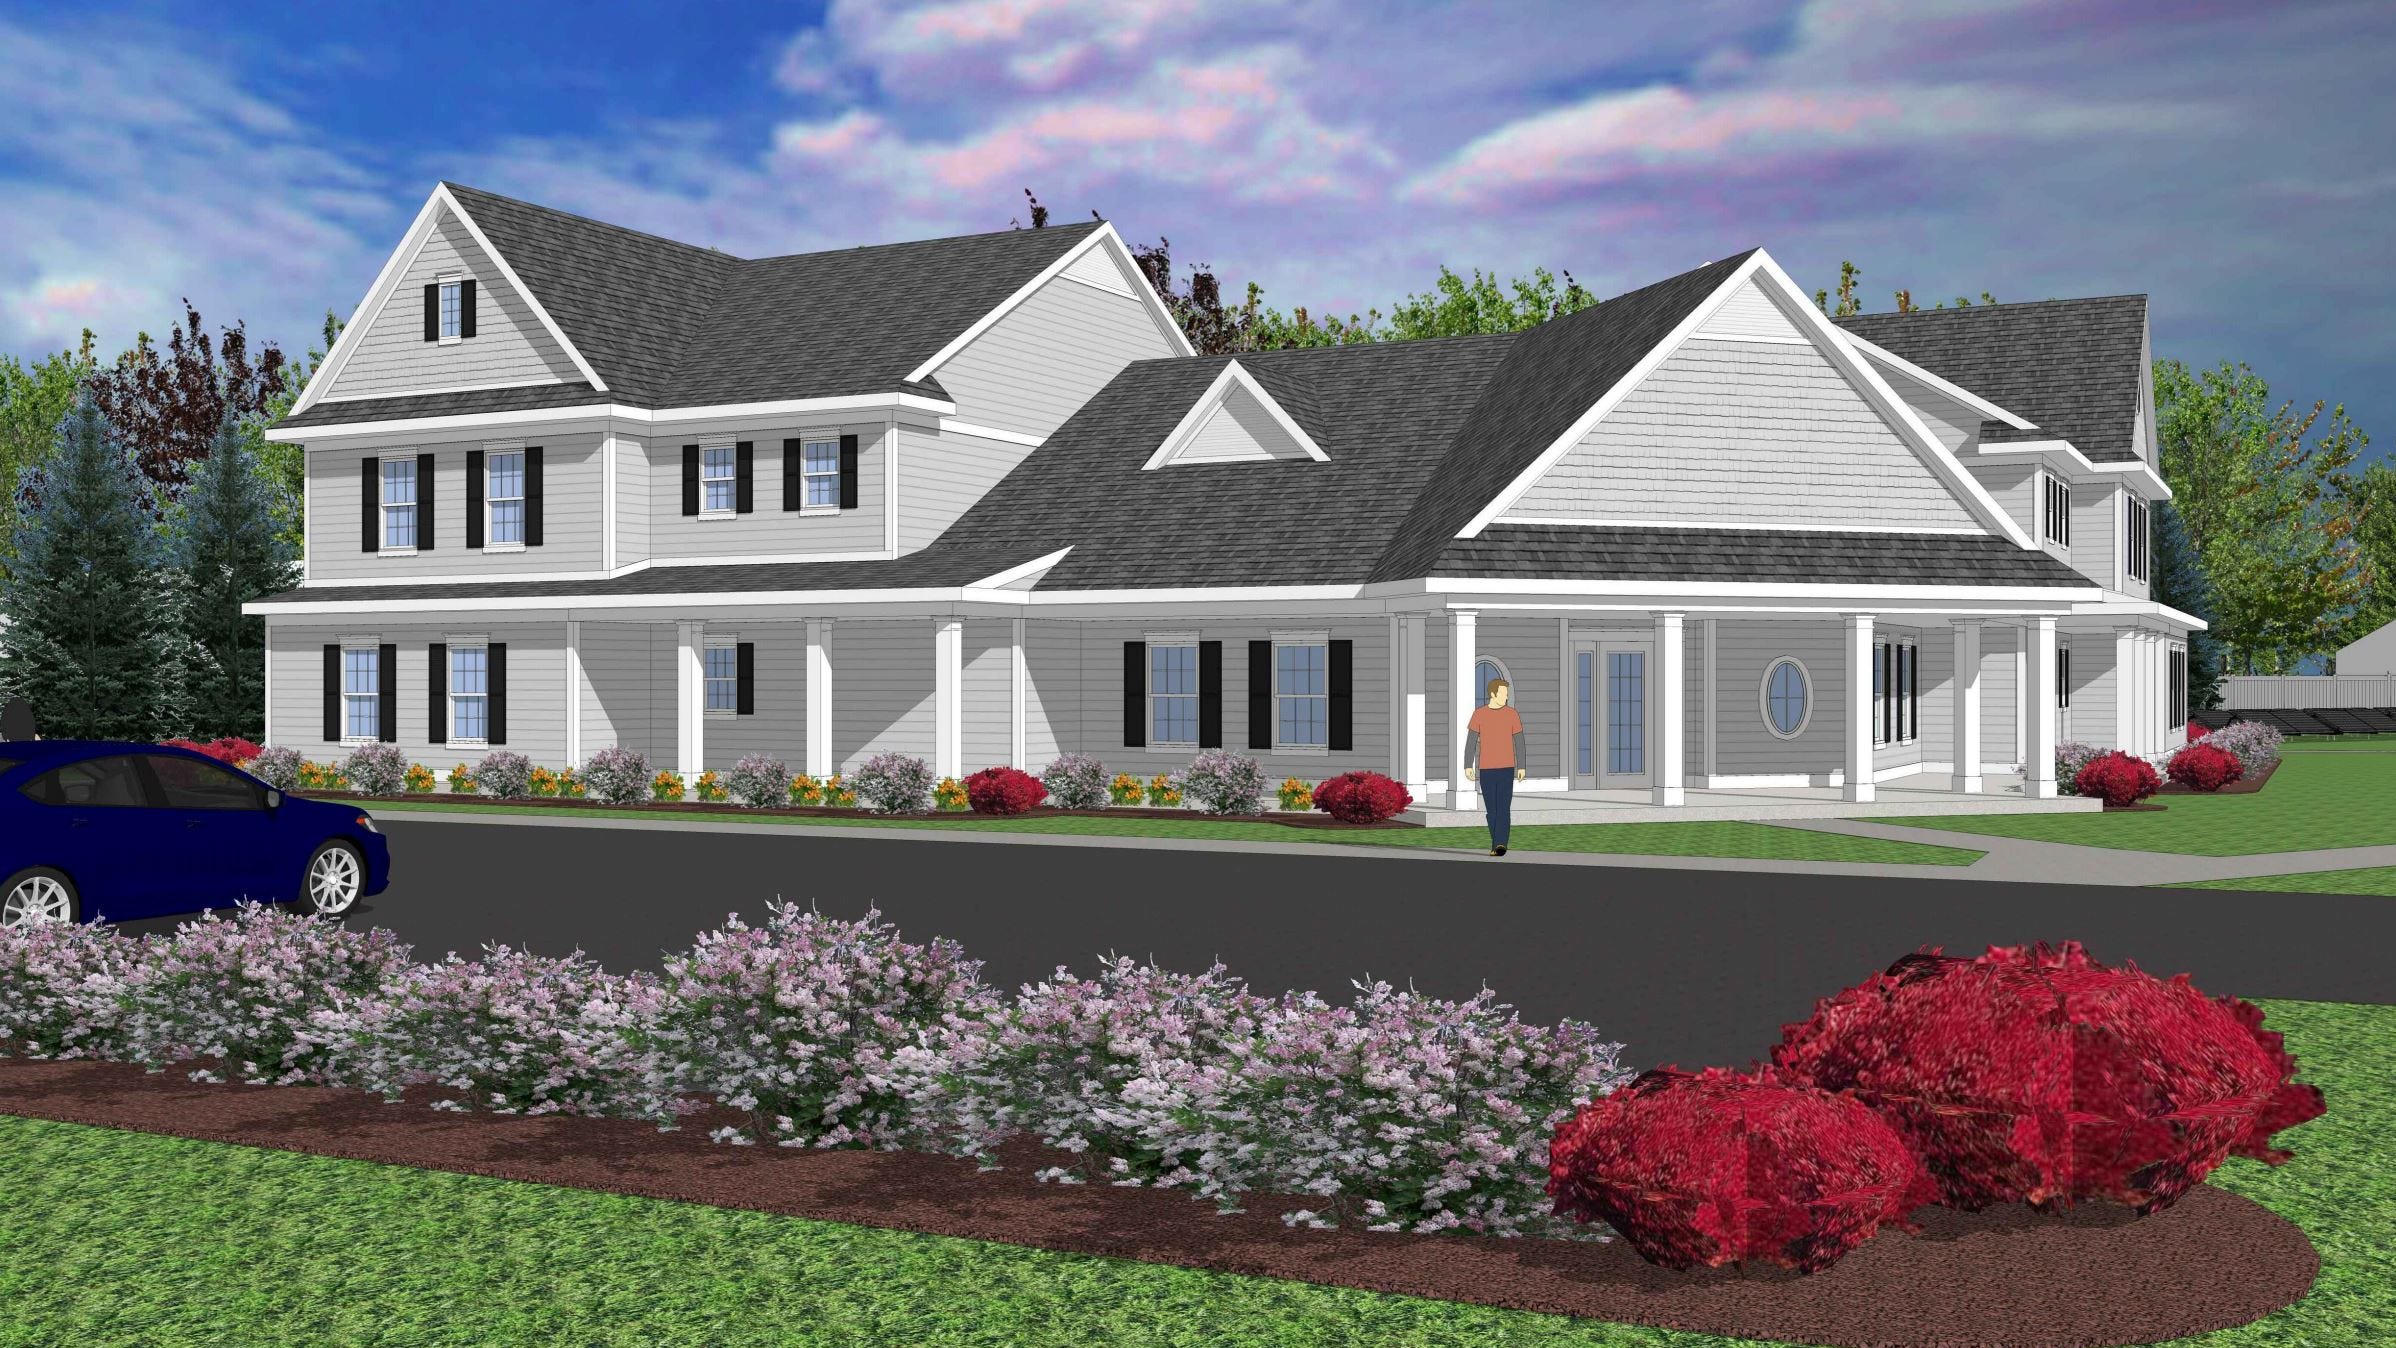 32-bed inpatient addiction recovery residence coming to Brighton